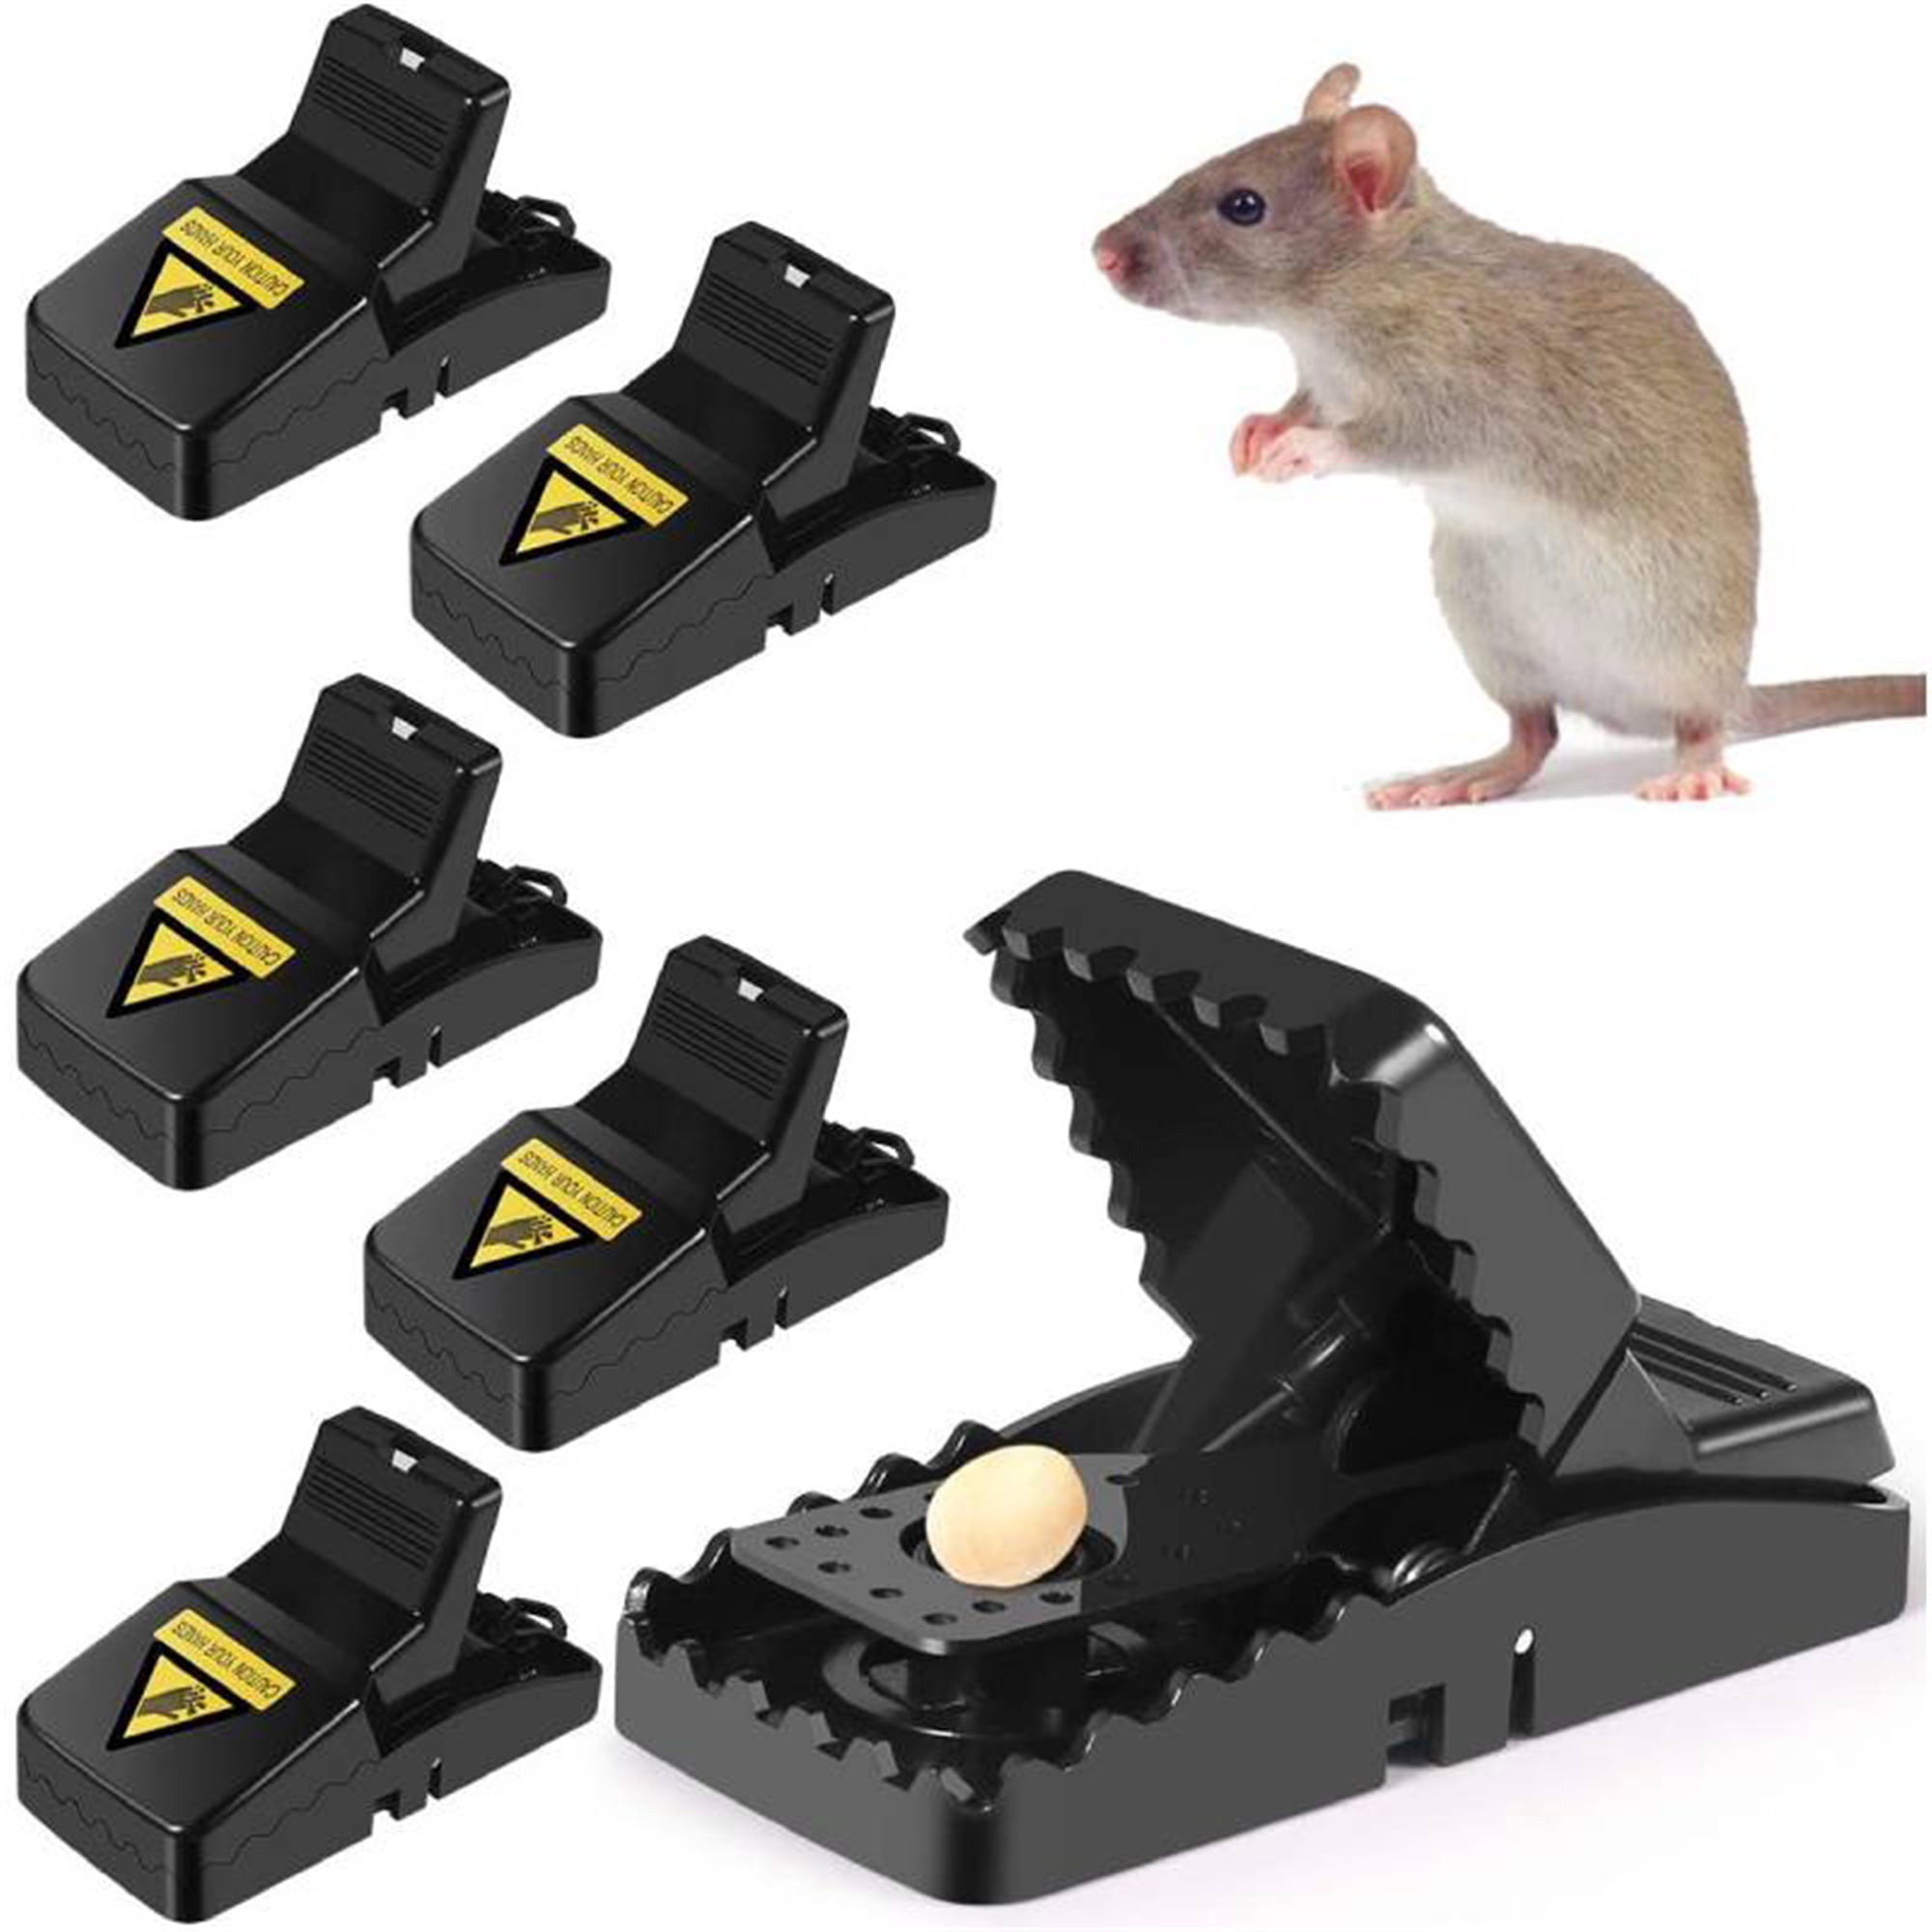  AKCHY Best Mouse Trap, Mouse Traps Quick Kill That Work, Best  for Small Mice Mouse, Reuseable, Quick Response, Abs and Steel Material,  Pack of 6 : Patio, Lawn & Garden